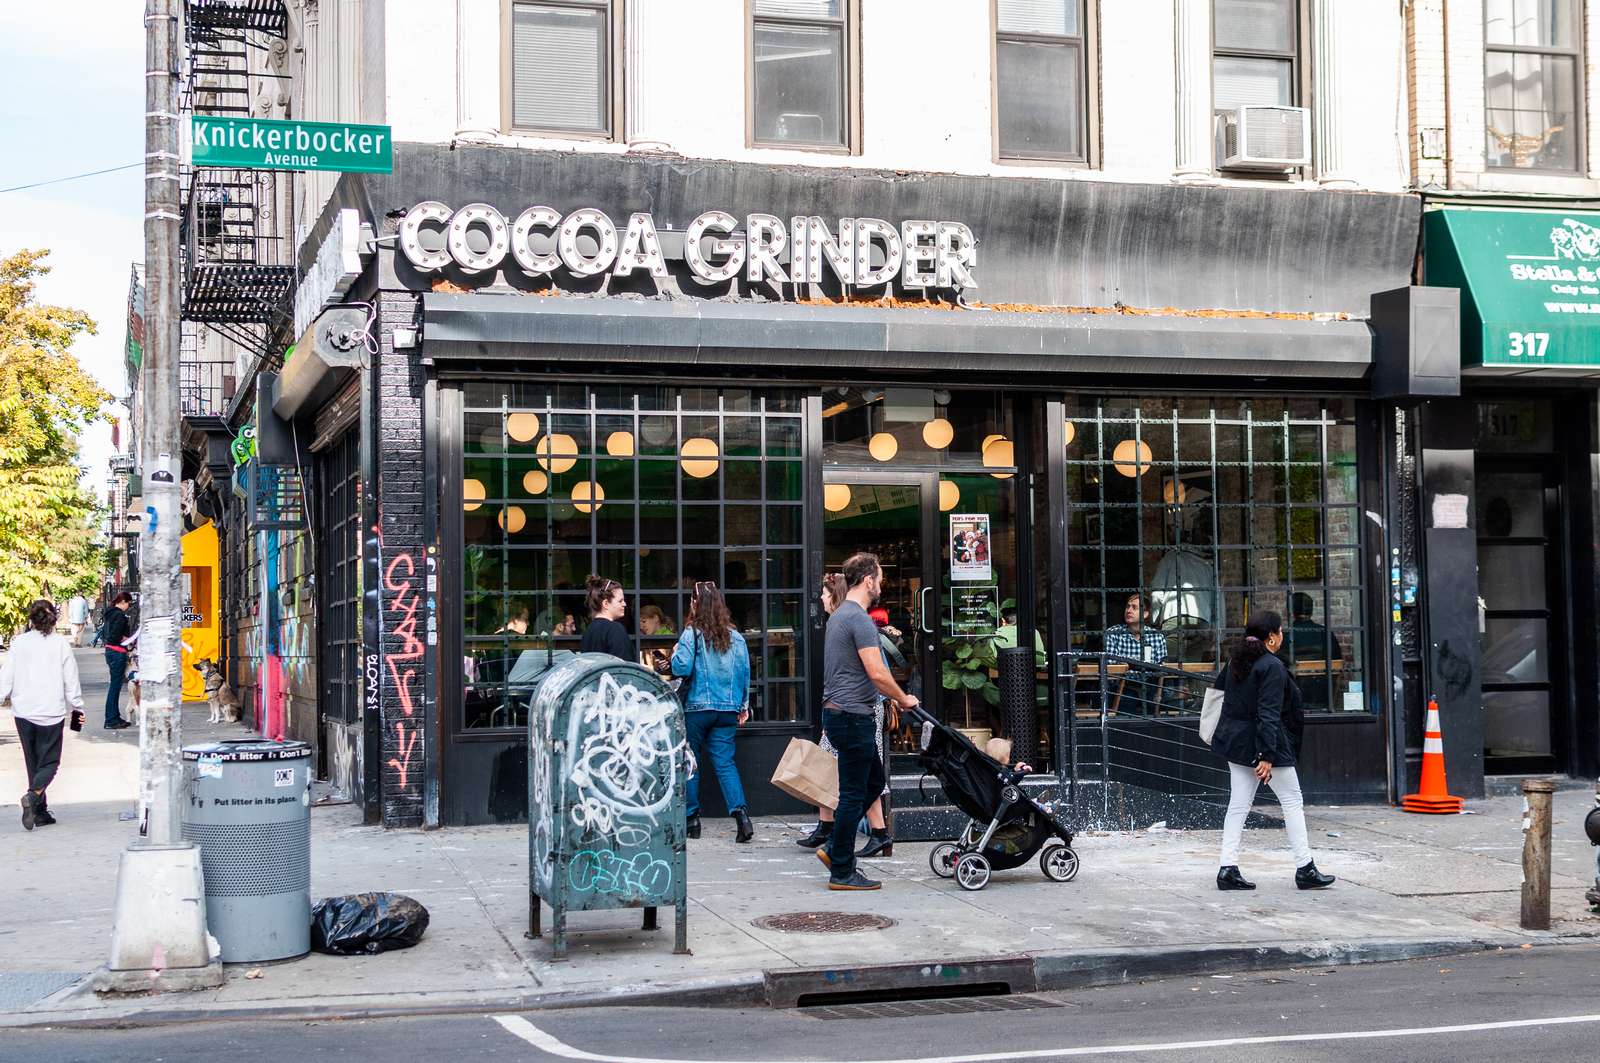 Cocoa Grinder exterior with people walking